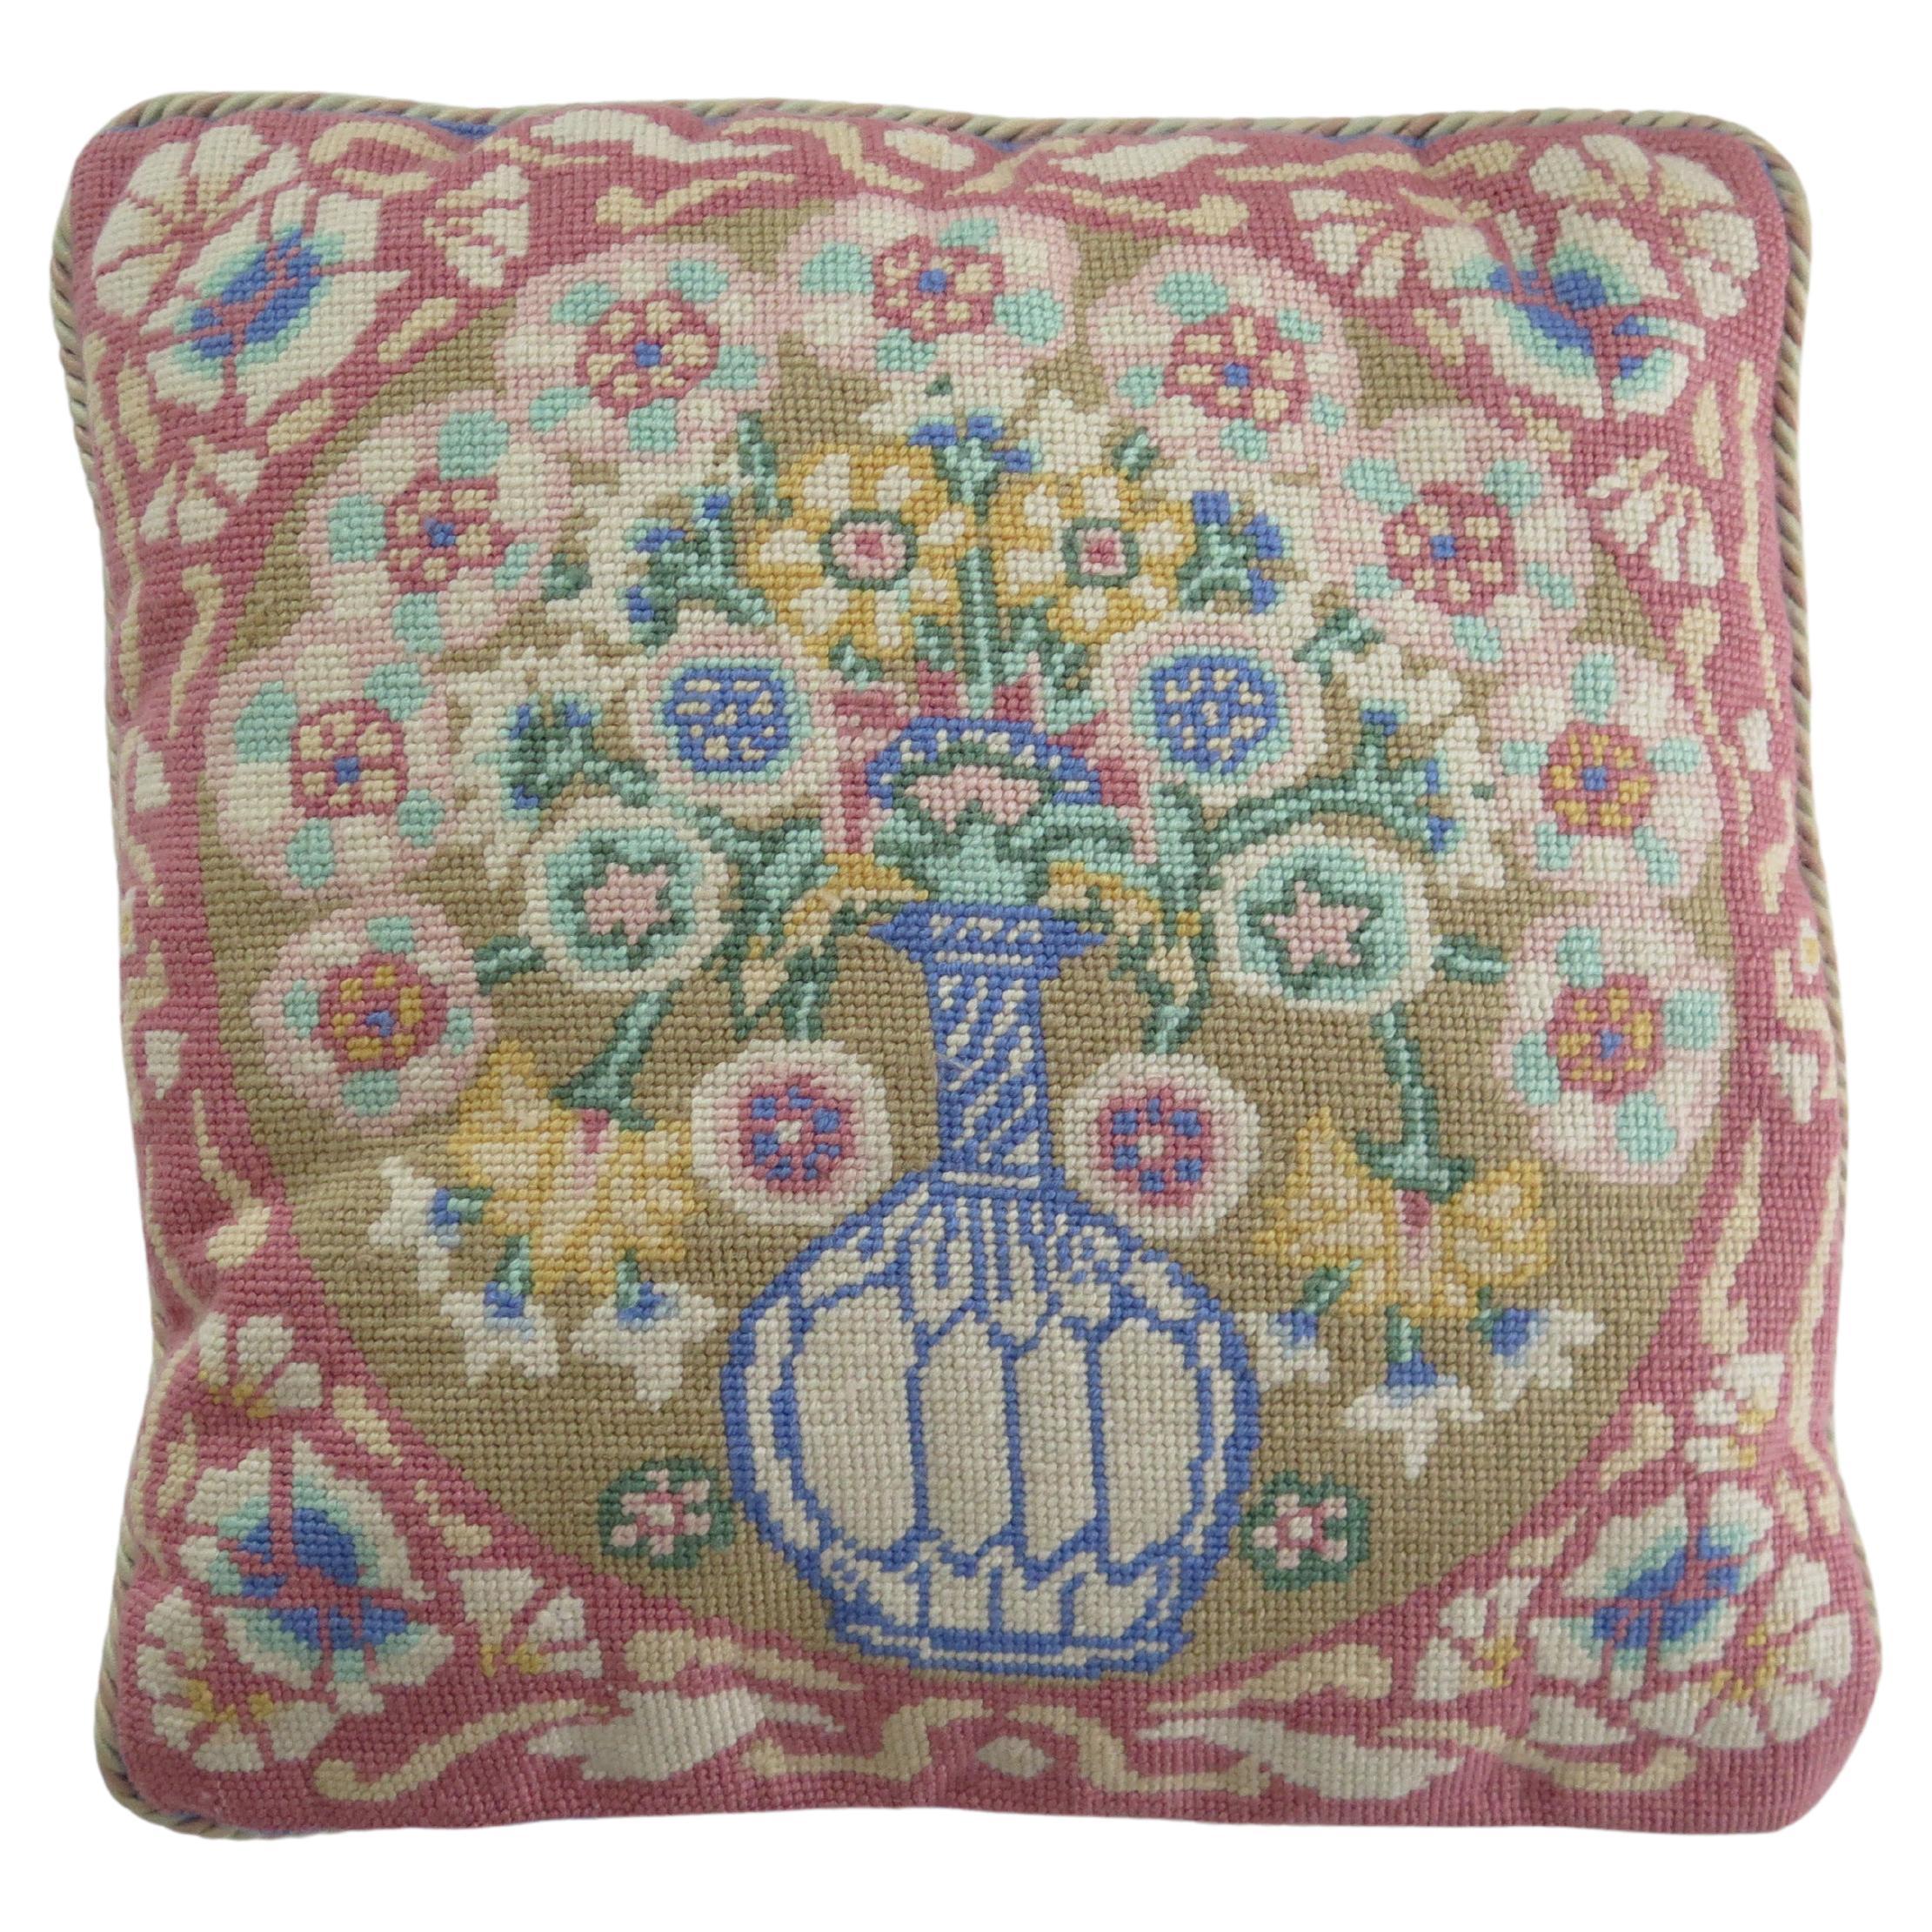 Woven Cushion or Pillow with Flower Vase pattern in pastel shades, Circa 1930s For Sale